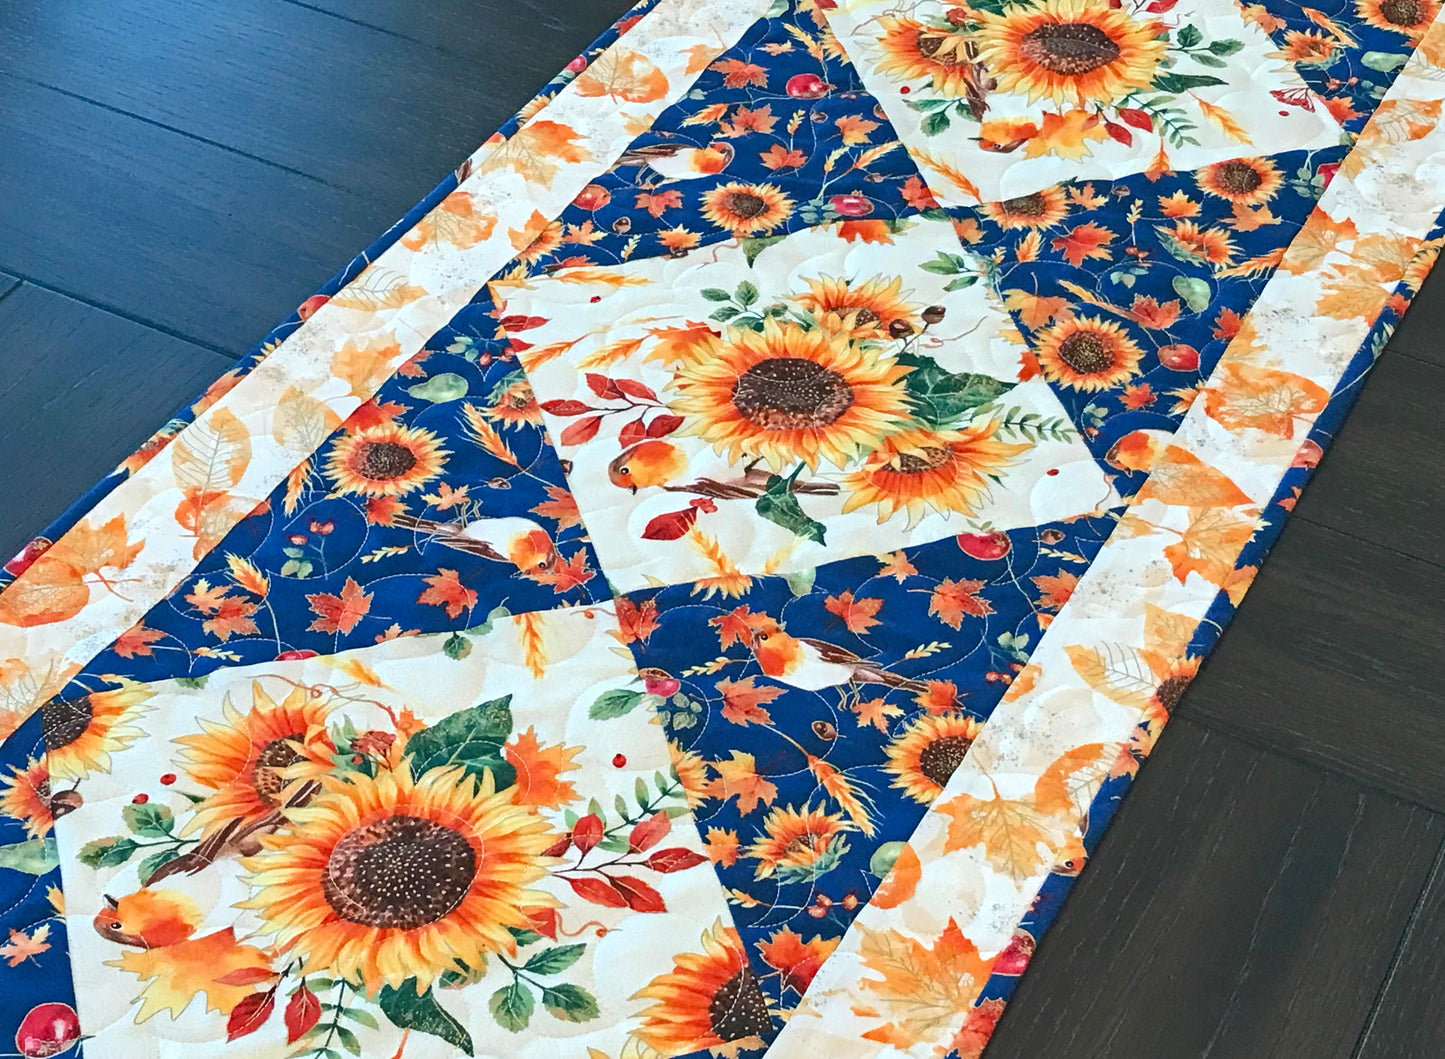 Sunflower themed fall table runner with a center diamond pattern of sunflowers surrounded by gold leaves and dark blue accents displayed on a table